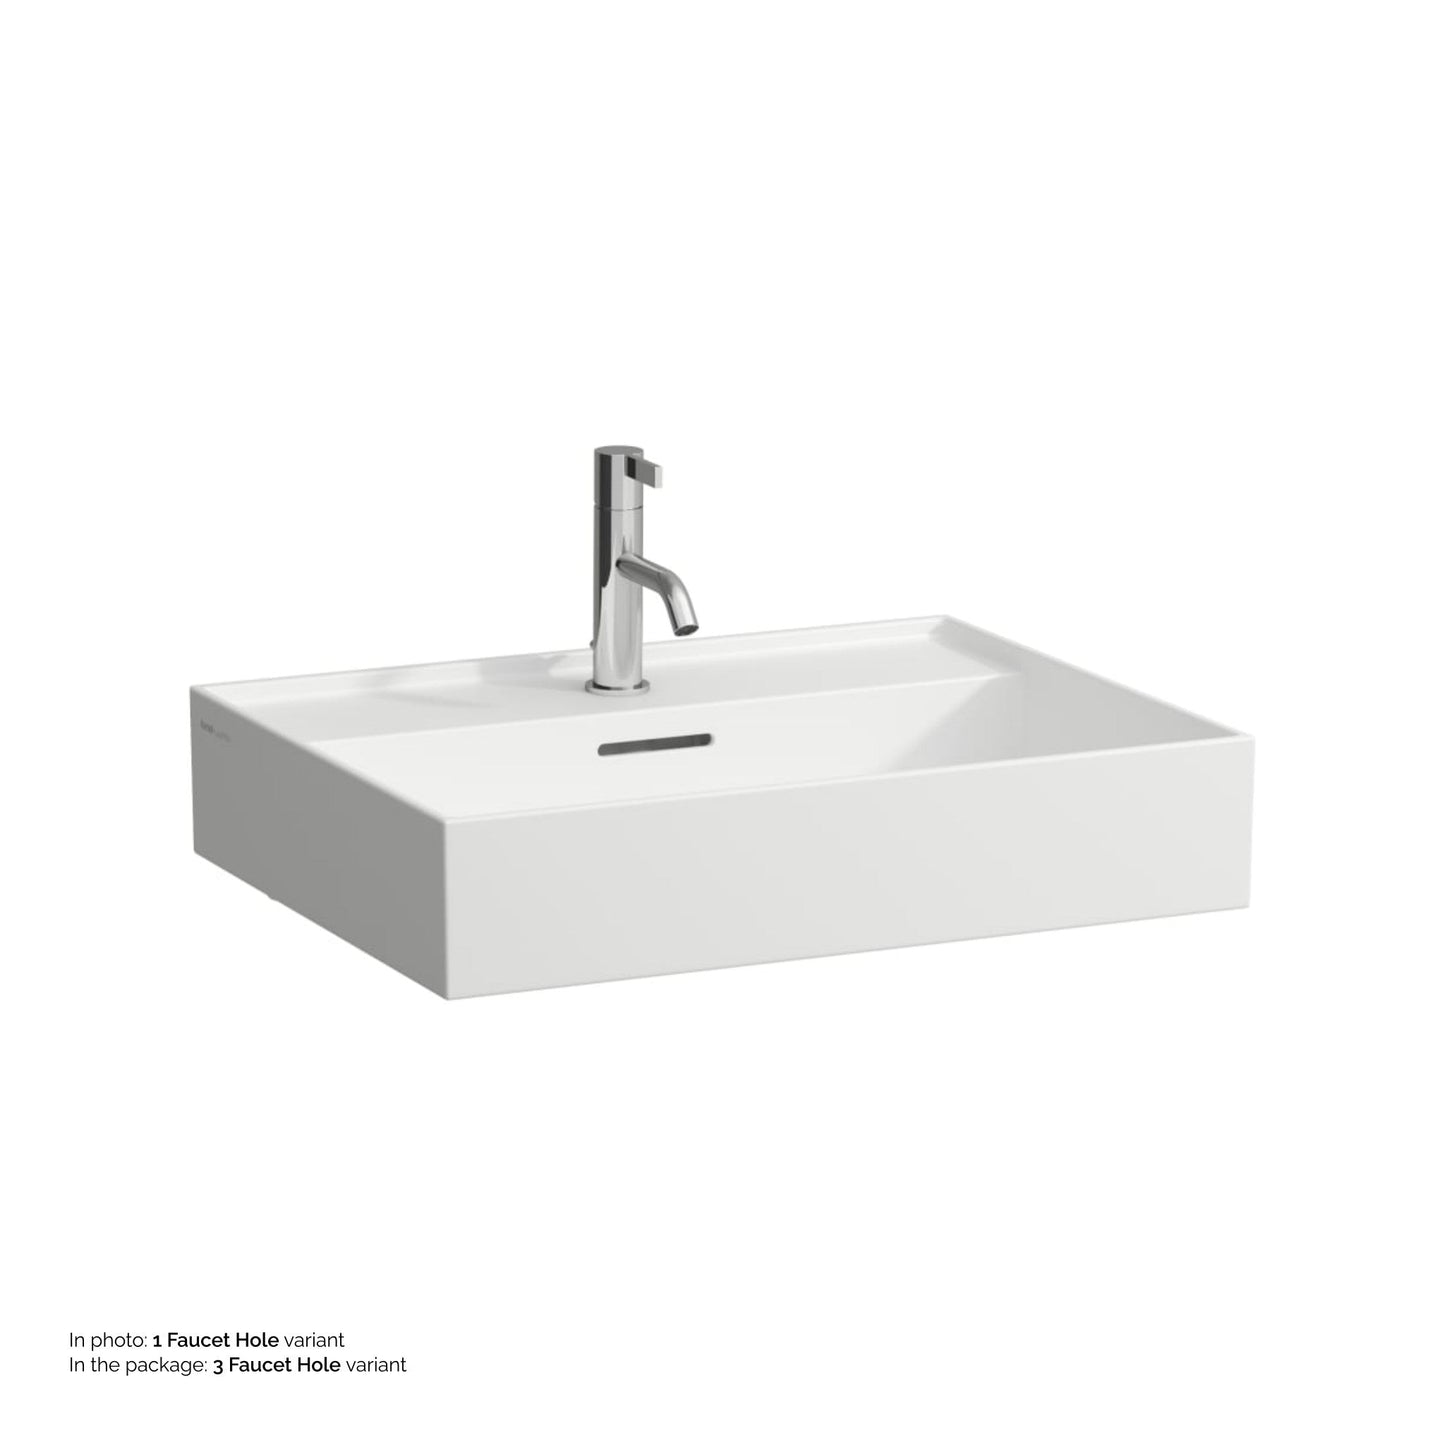 Laufen Kartell 24" x 18" Matte White Countertop Bathroom Sink With 3 Faucet Holes